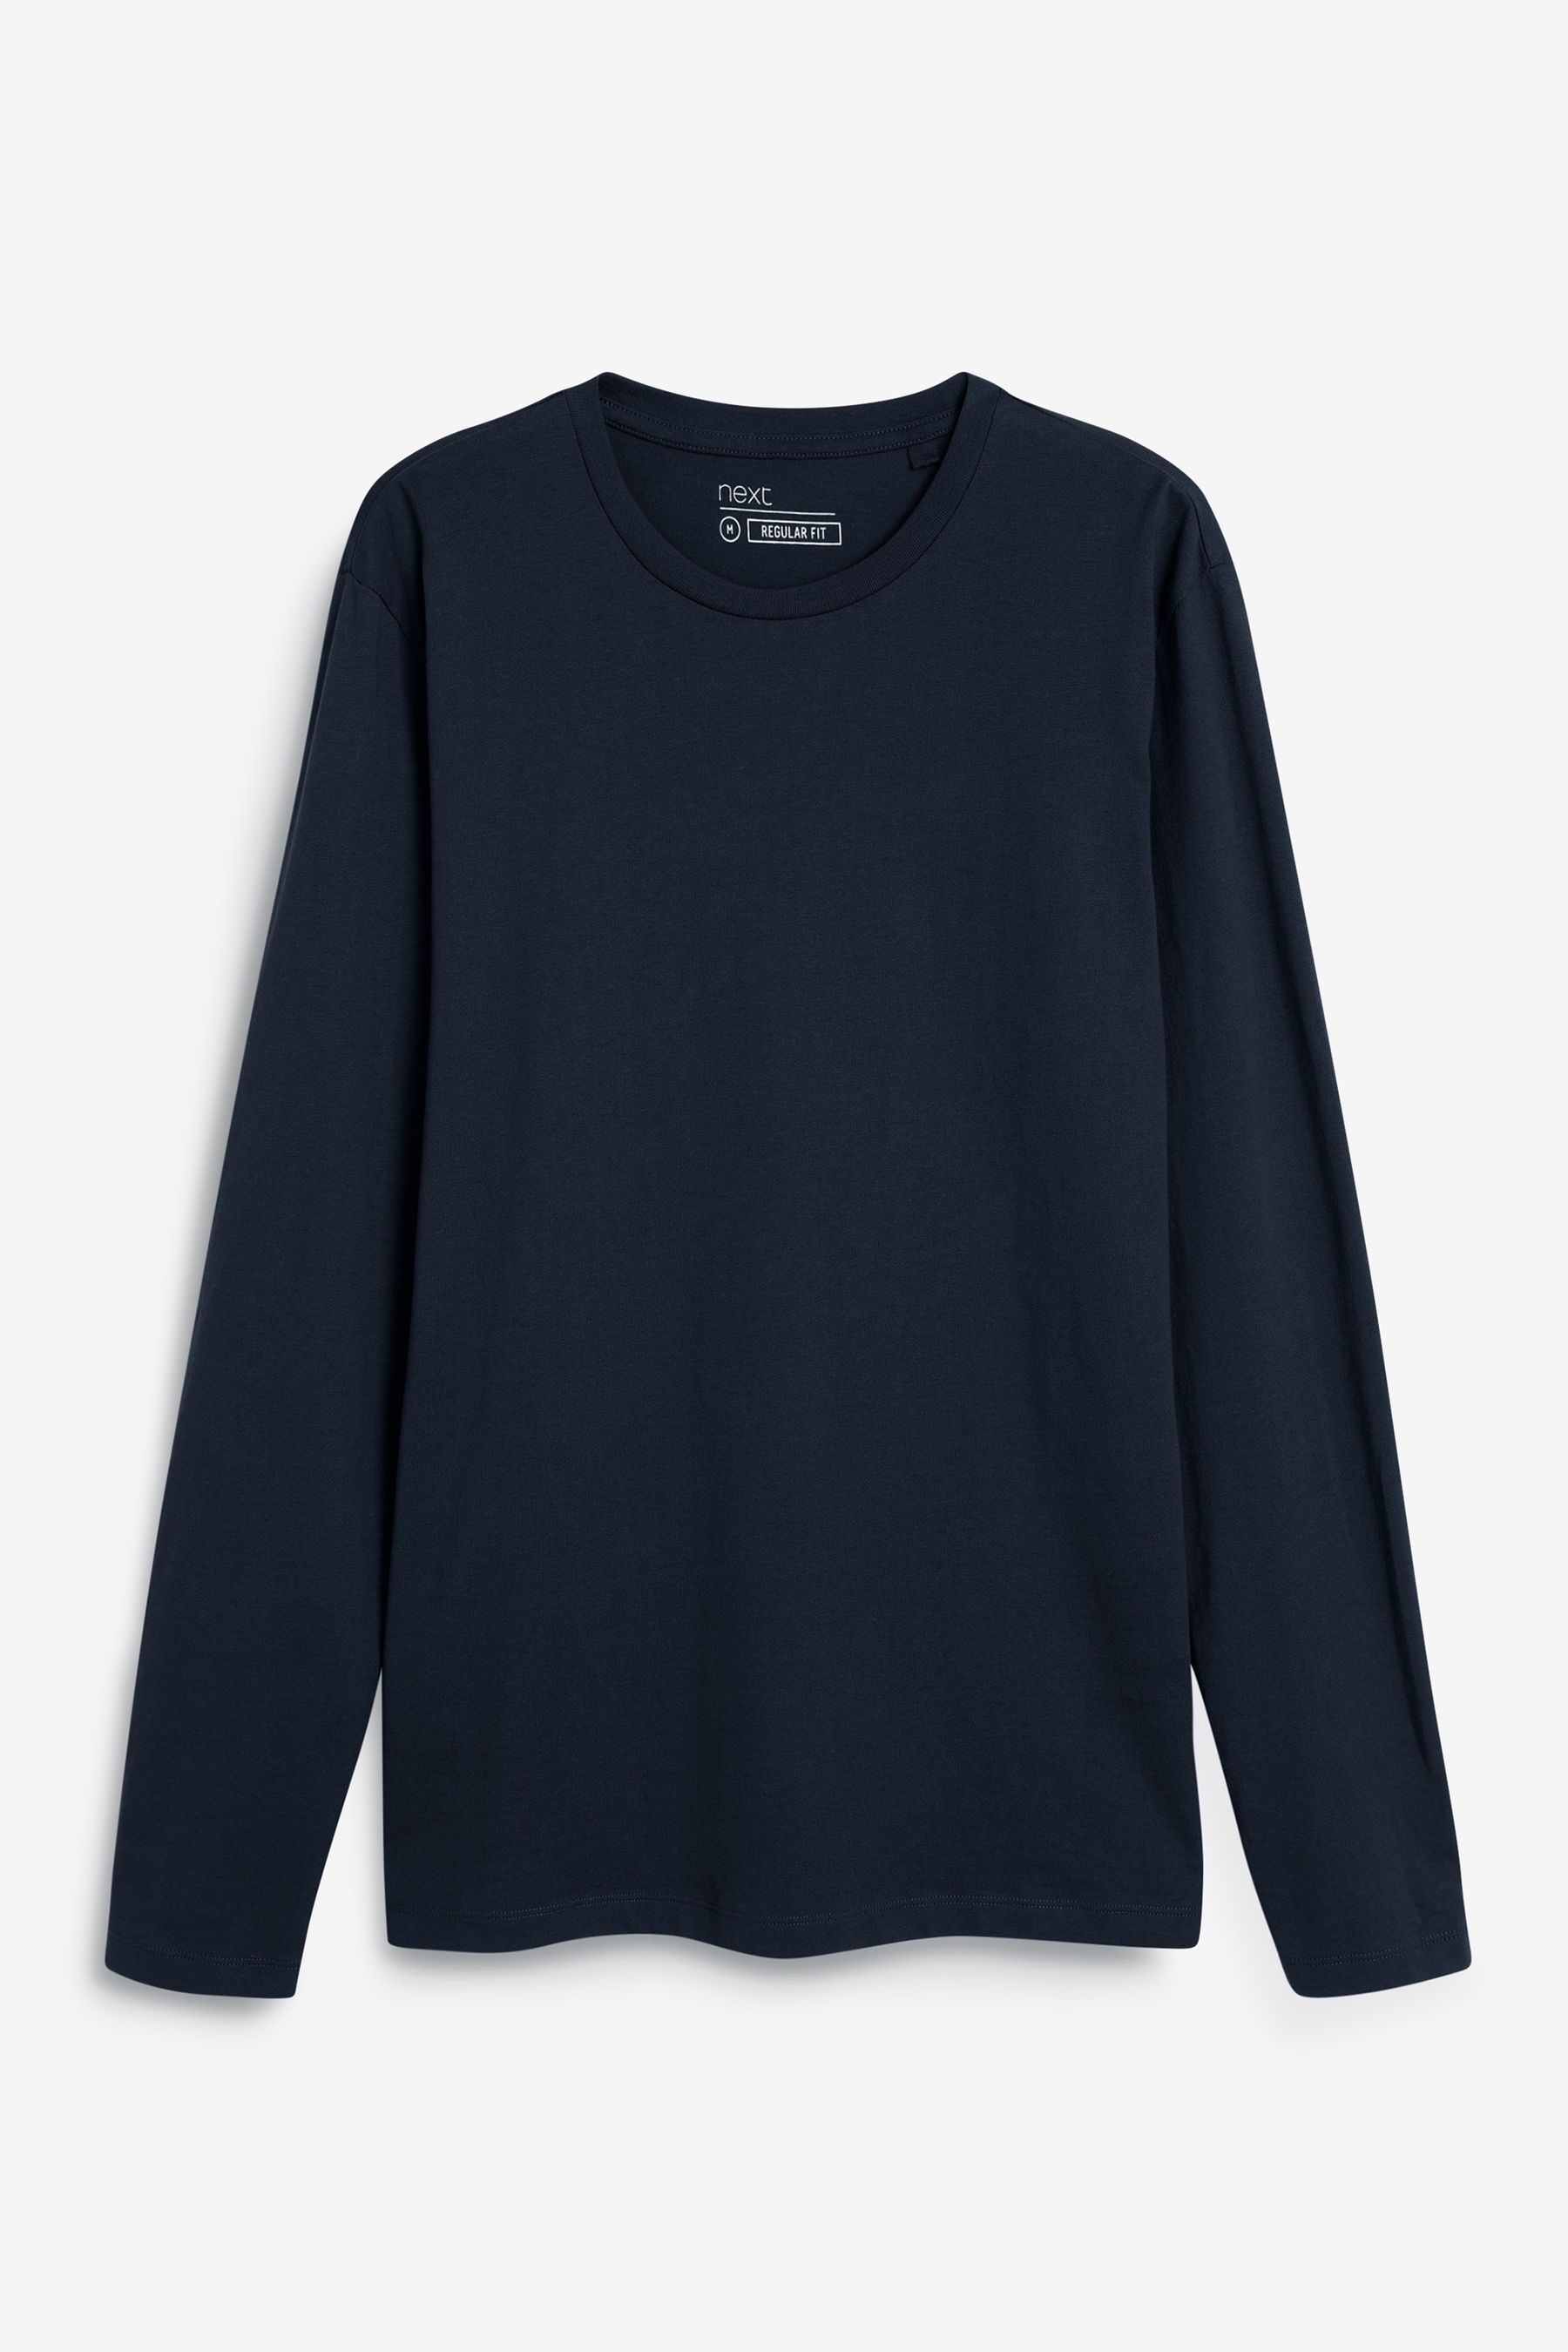 Buy Navy Blue Slim Long Sleeve Crew Neck T-Shirt from the Next UK ...